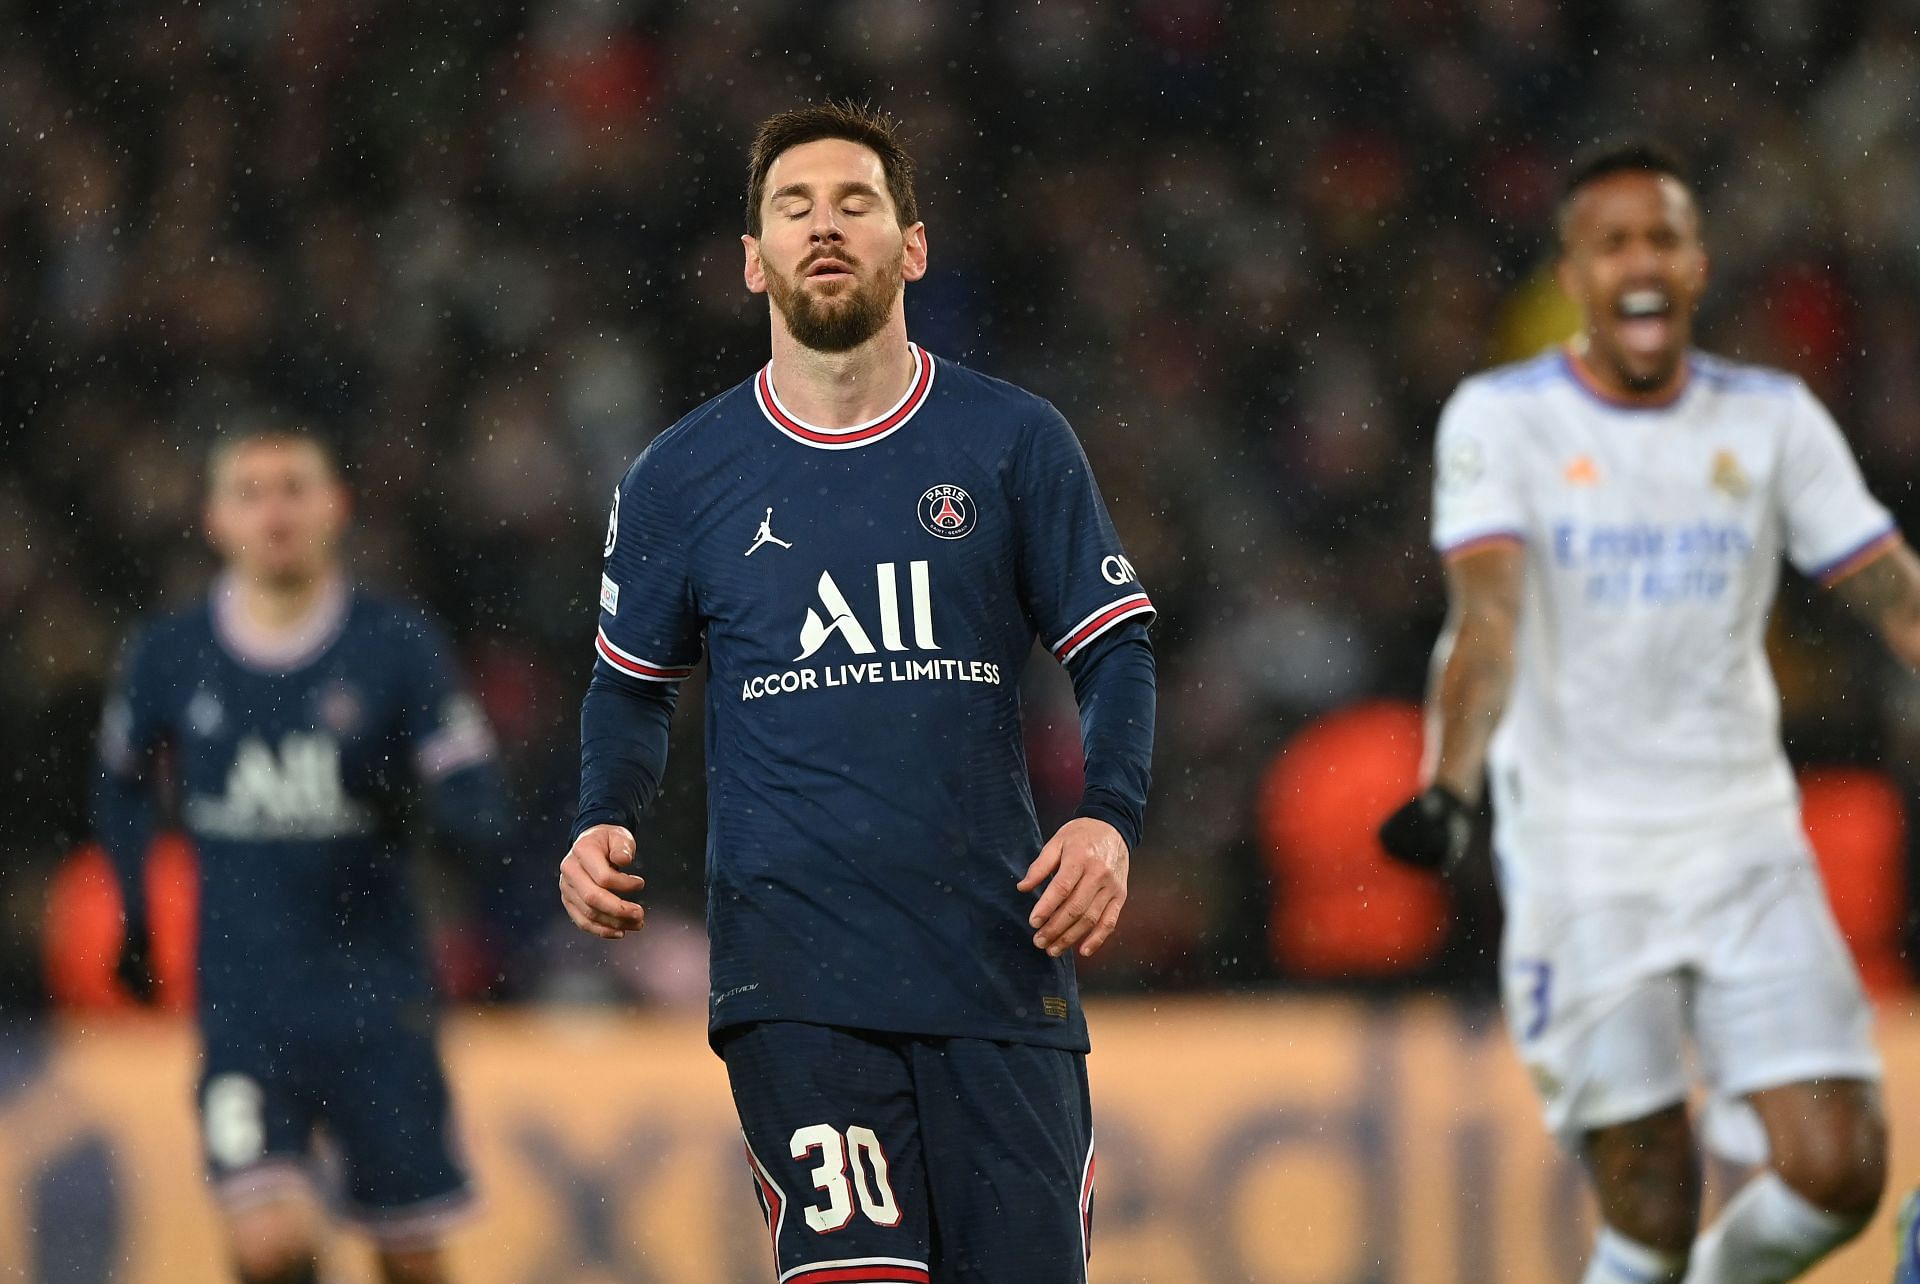 Lionel Messi has not been his usual self in Paris.